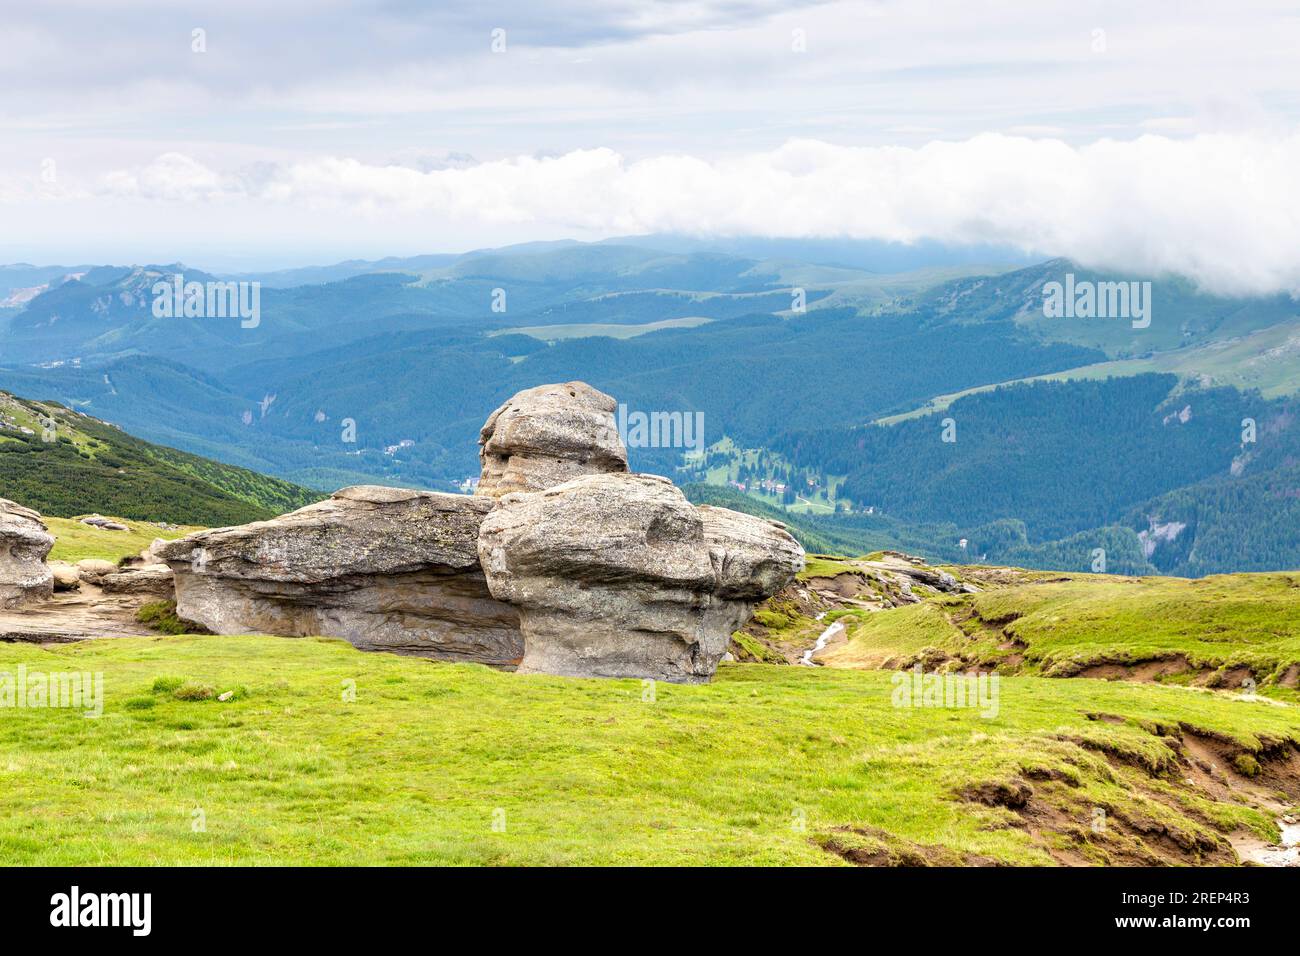 Babele Natural Monument on the Babele Plateau in the Bucegi Mountains, Romania Stock Photo